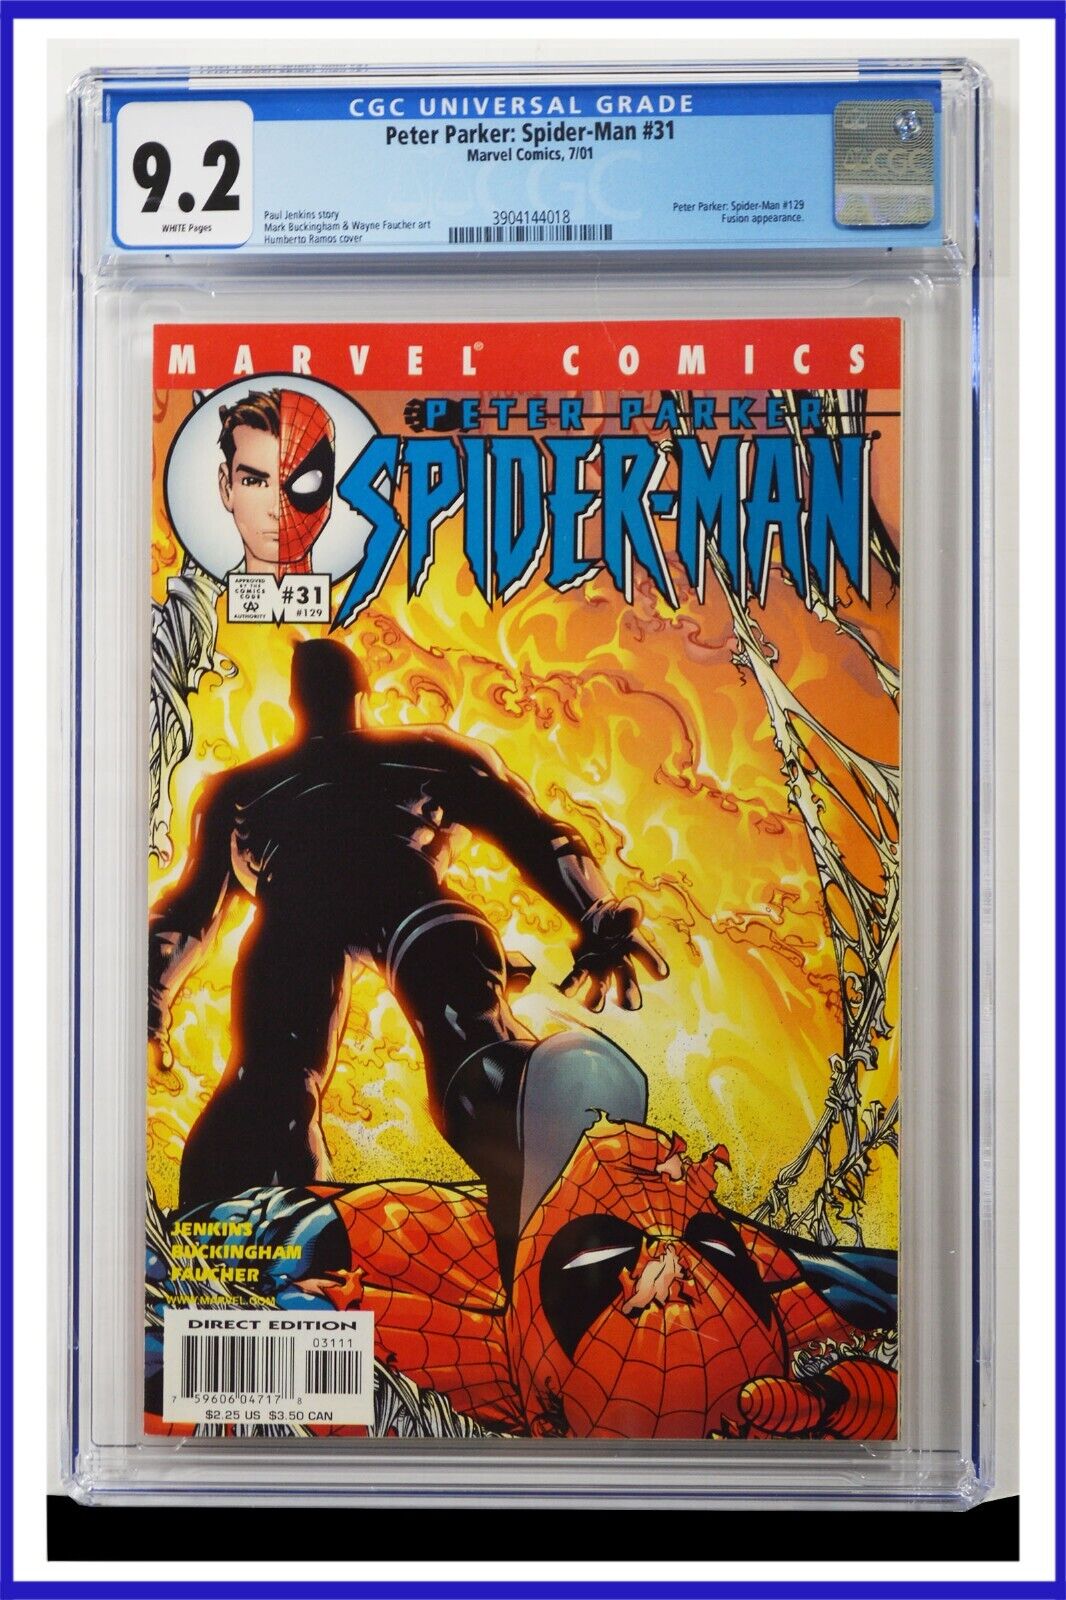 Peter Parker Spider-Man #31 CGC Graded 9.2 Marvel 2001 White Pages Comic Book.